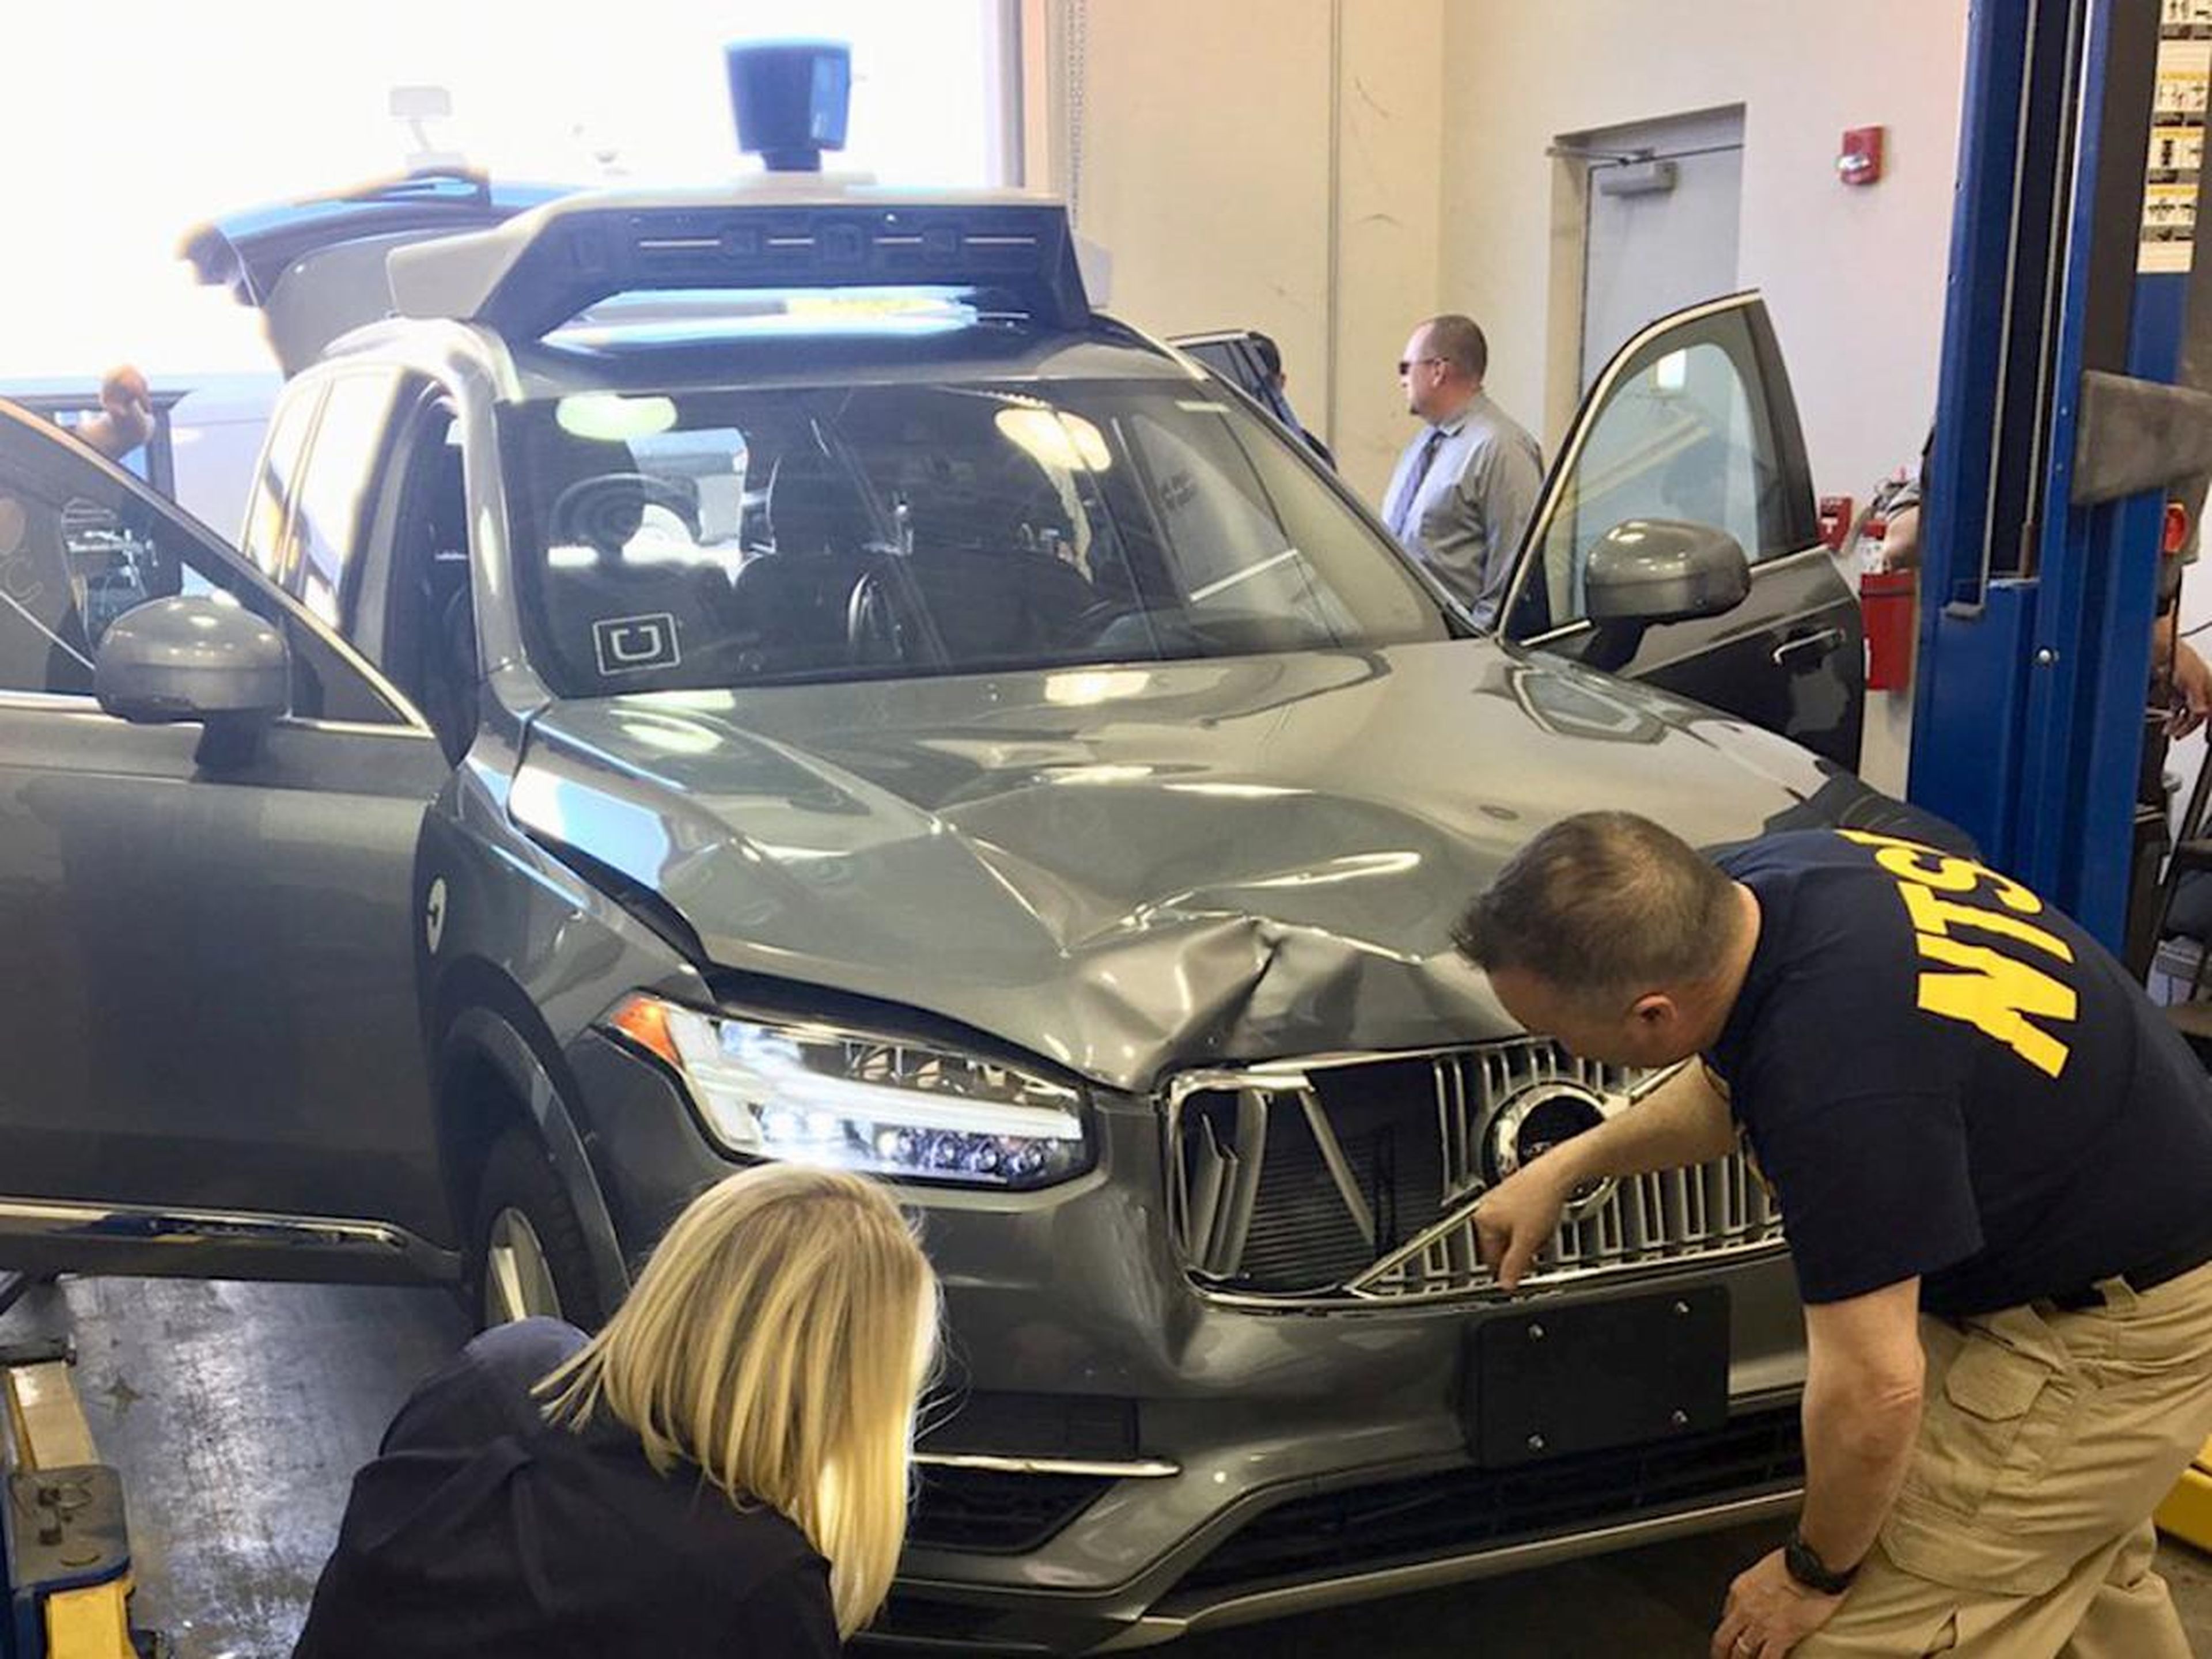 MARCH: This self-driving Uber car killed Elaine Herzberg. It was the first pedestrian fatality involving an autonomous vehicle.